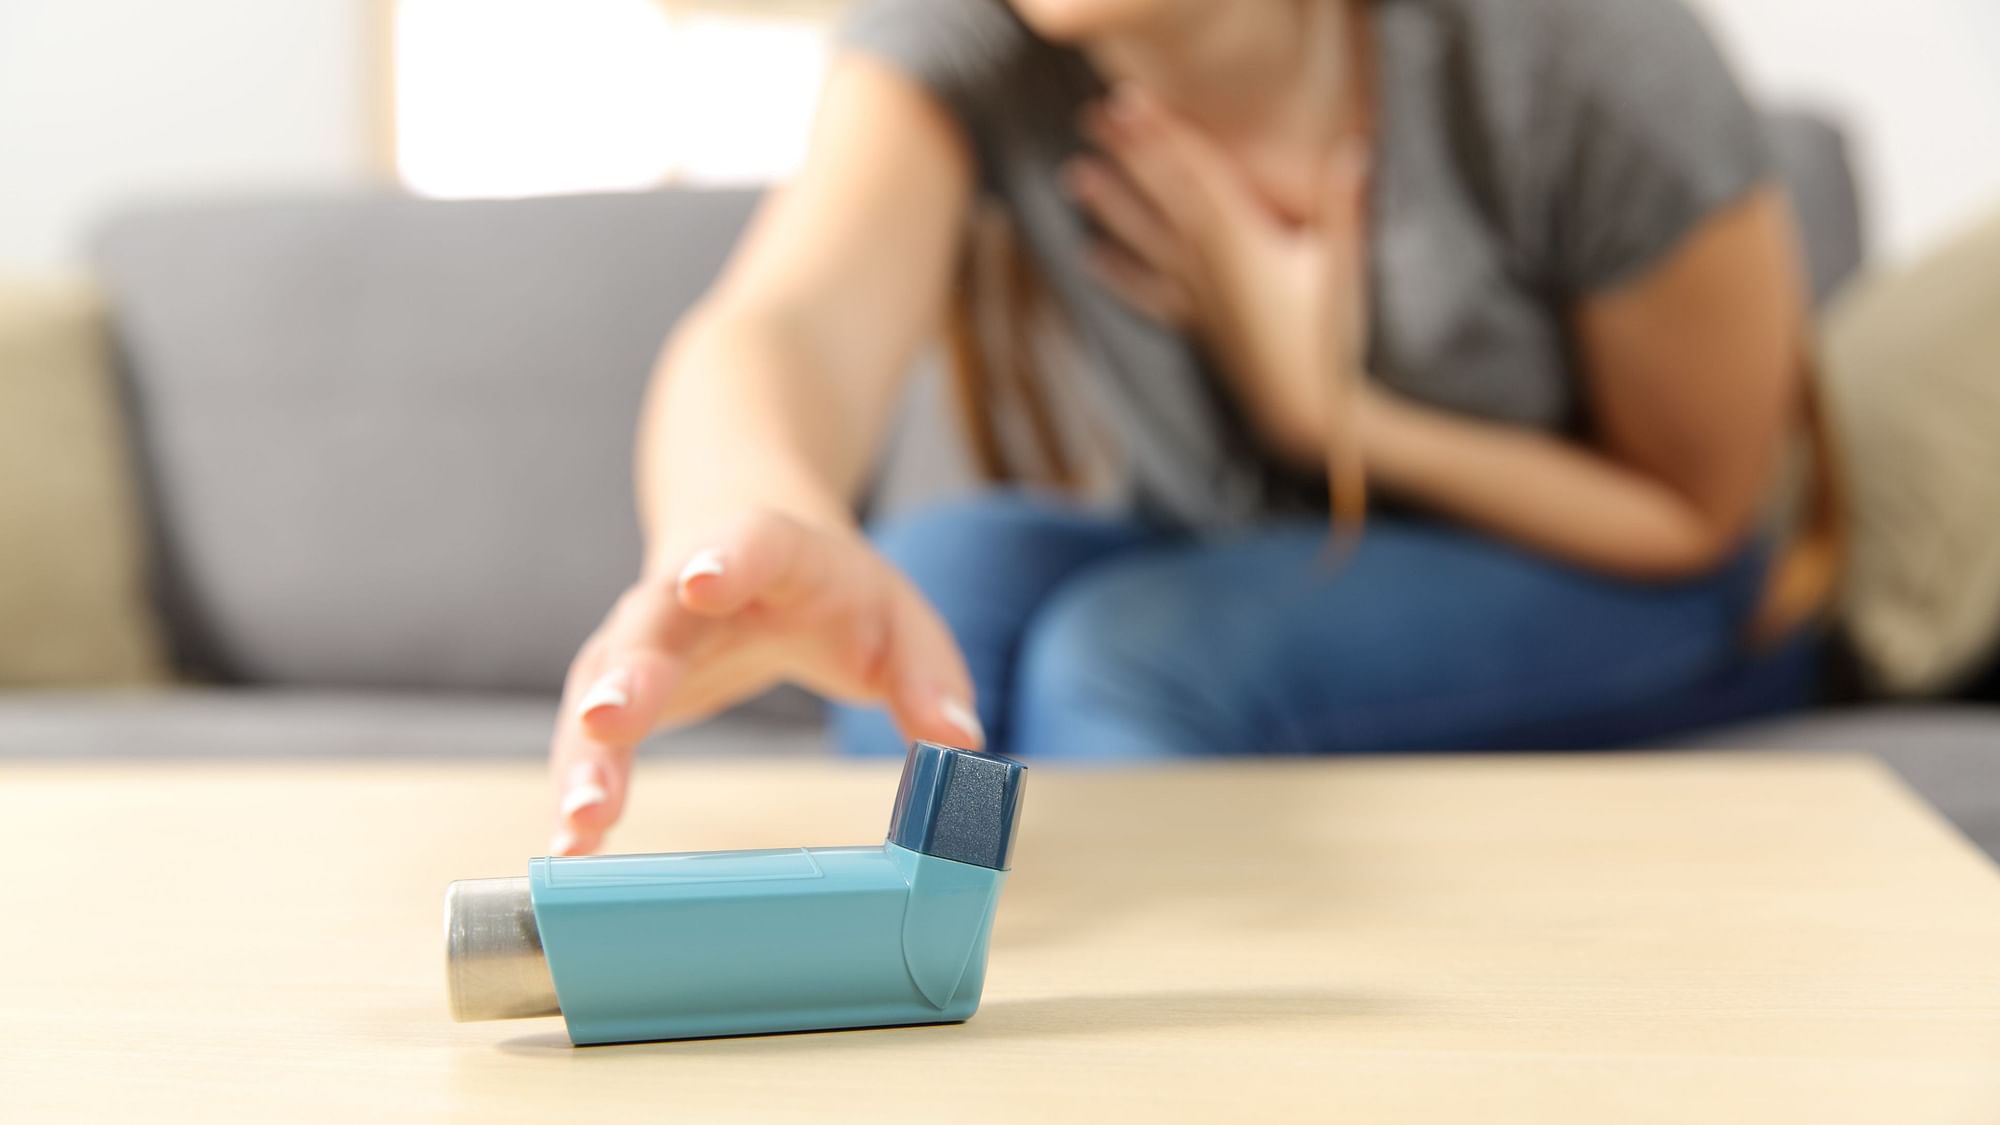 Researchers have found that women with asthma appear more likely to have lower levels of testosterone than women who do not have the disease.